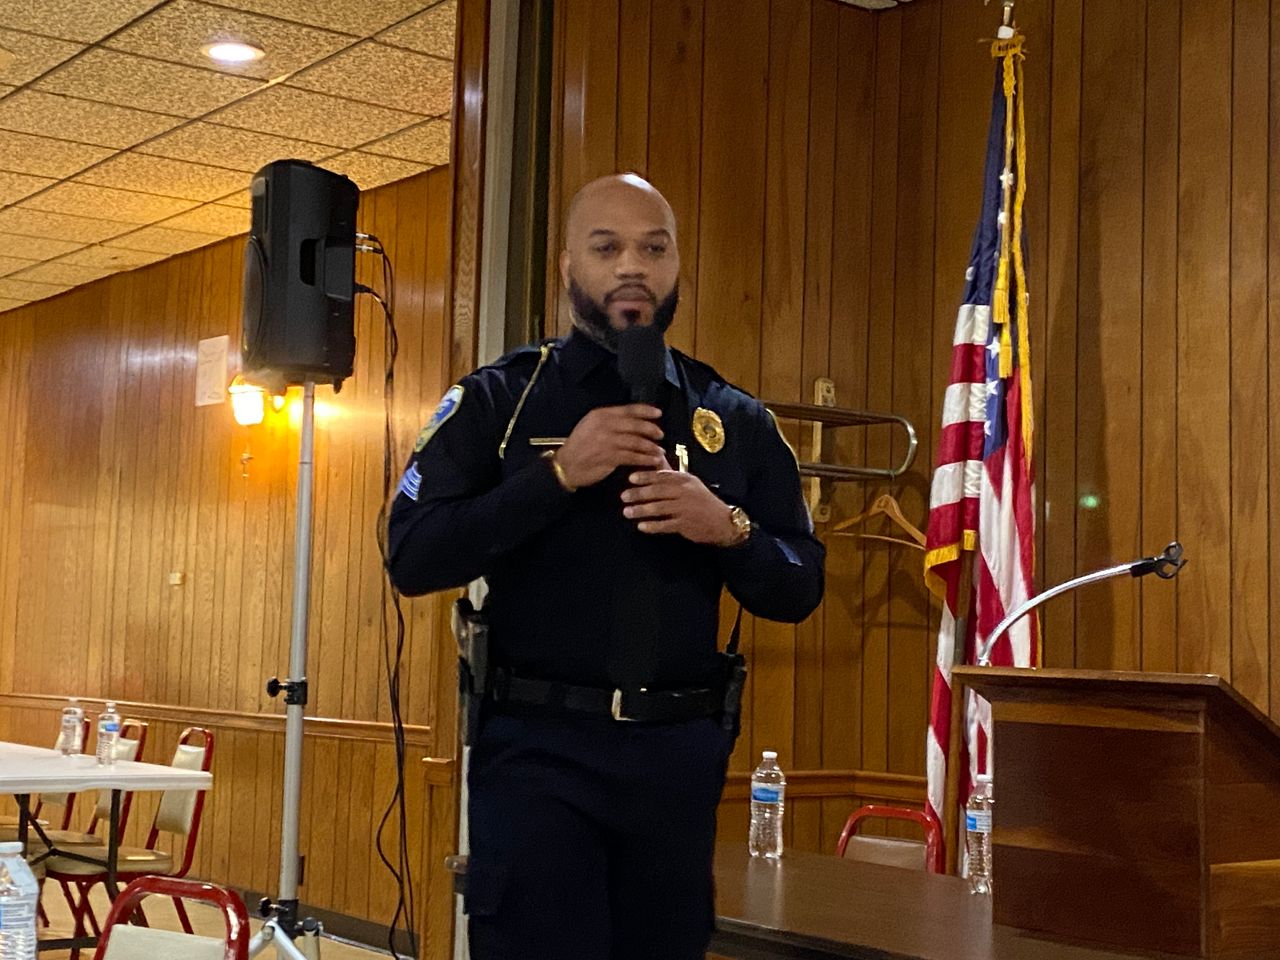 Sgt. Michael Murphy Jr., a 16-year veteran of the Akron police force, is the city's point person for protest groups. (Spectrum News 1/Jennifer Conn)